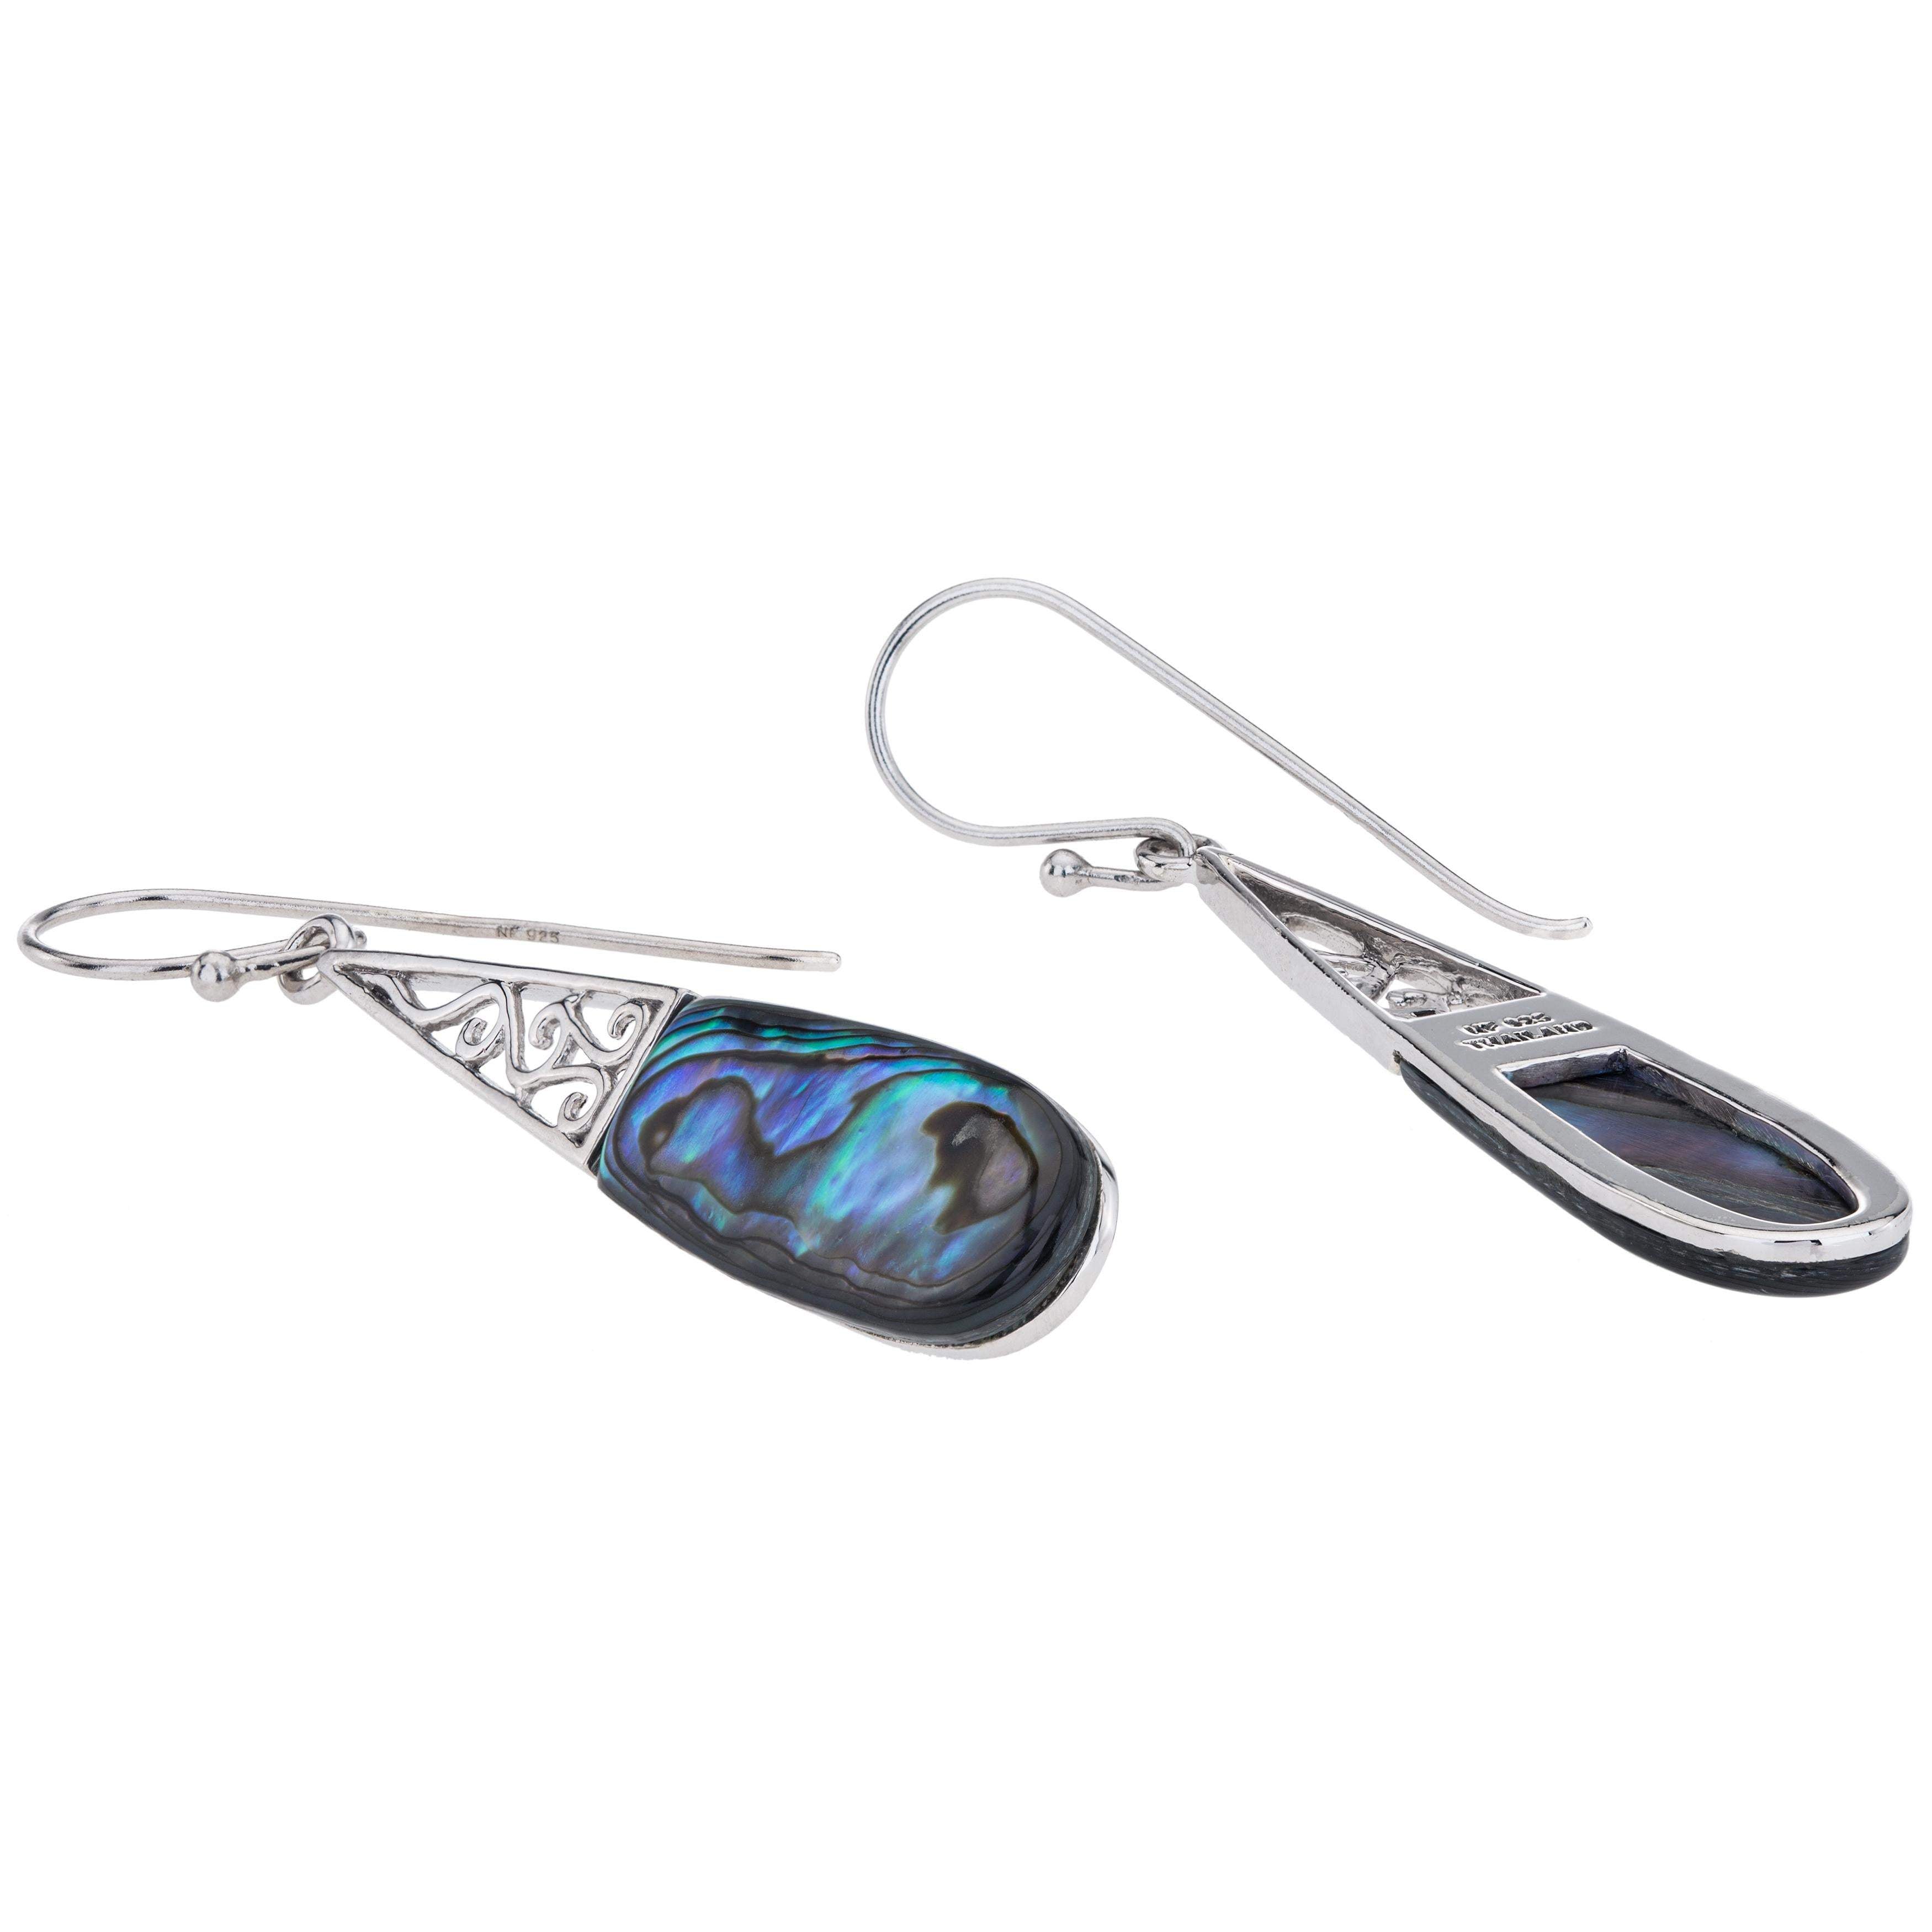 Sterling Silver Abalone Elongated Drop Earrings - Shop Thrifty Treasures